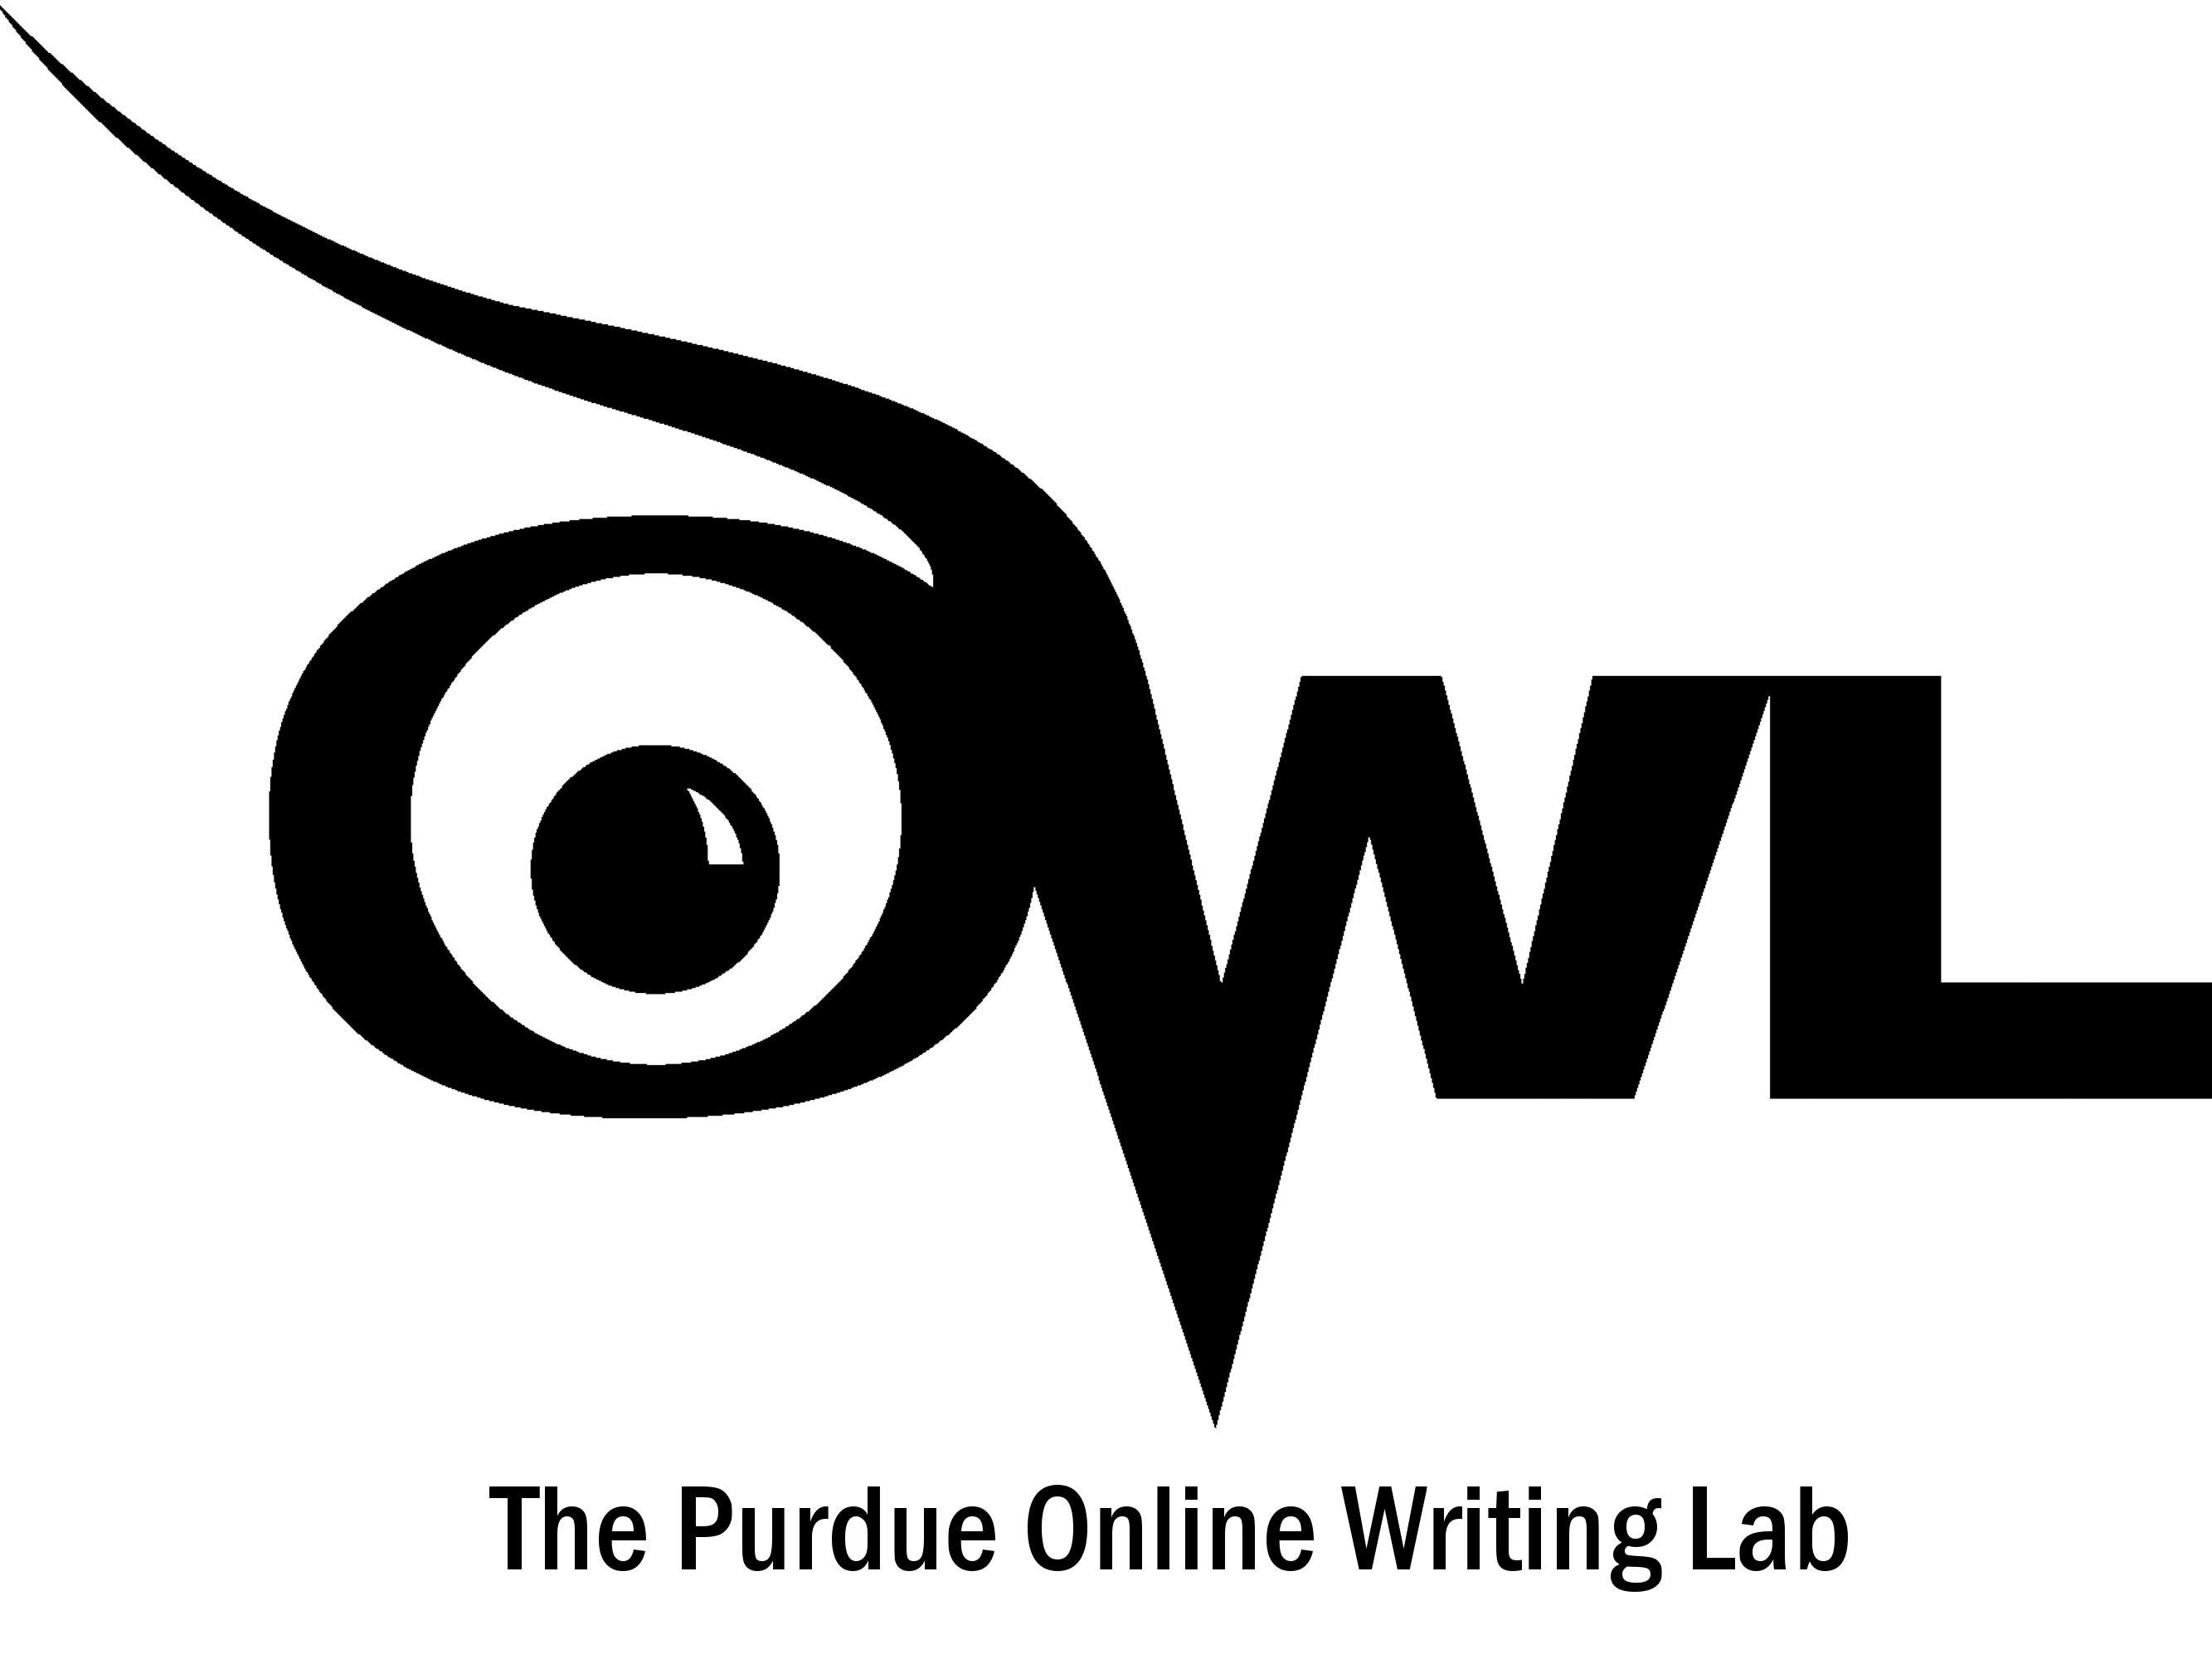 The Purdue Online Writing Lab